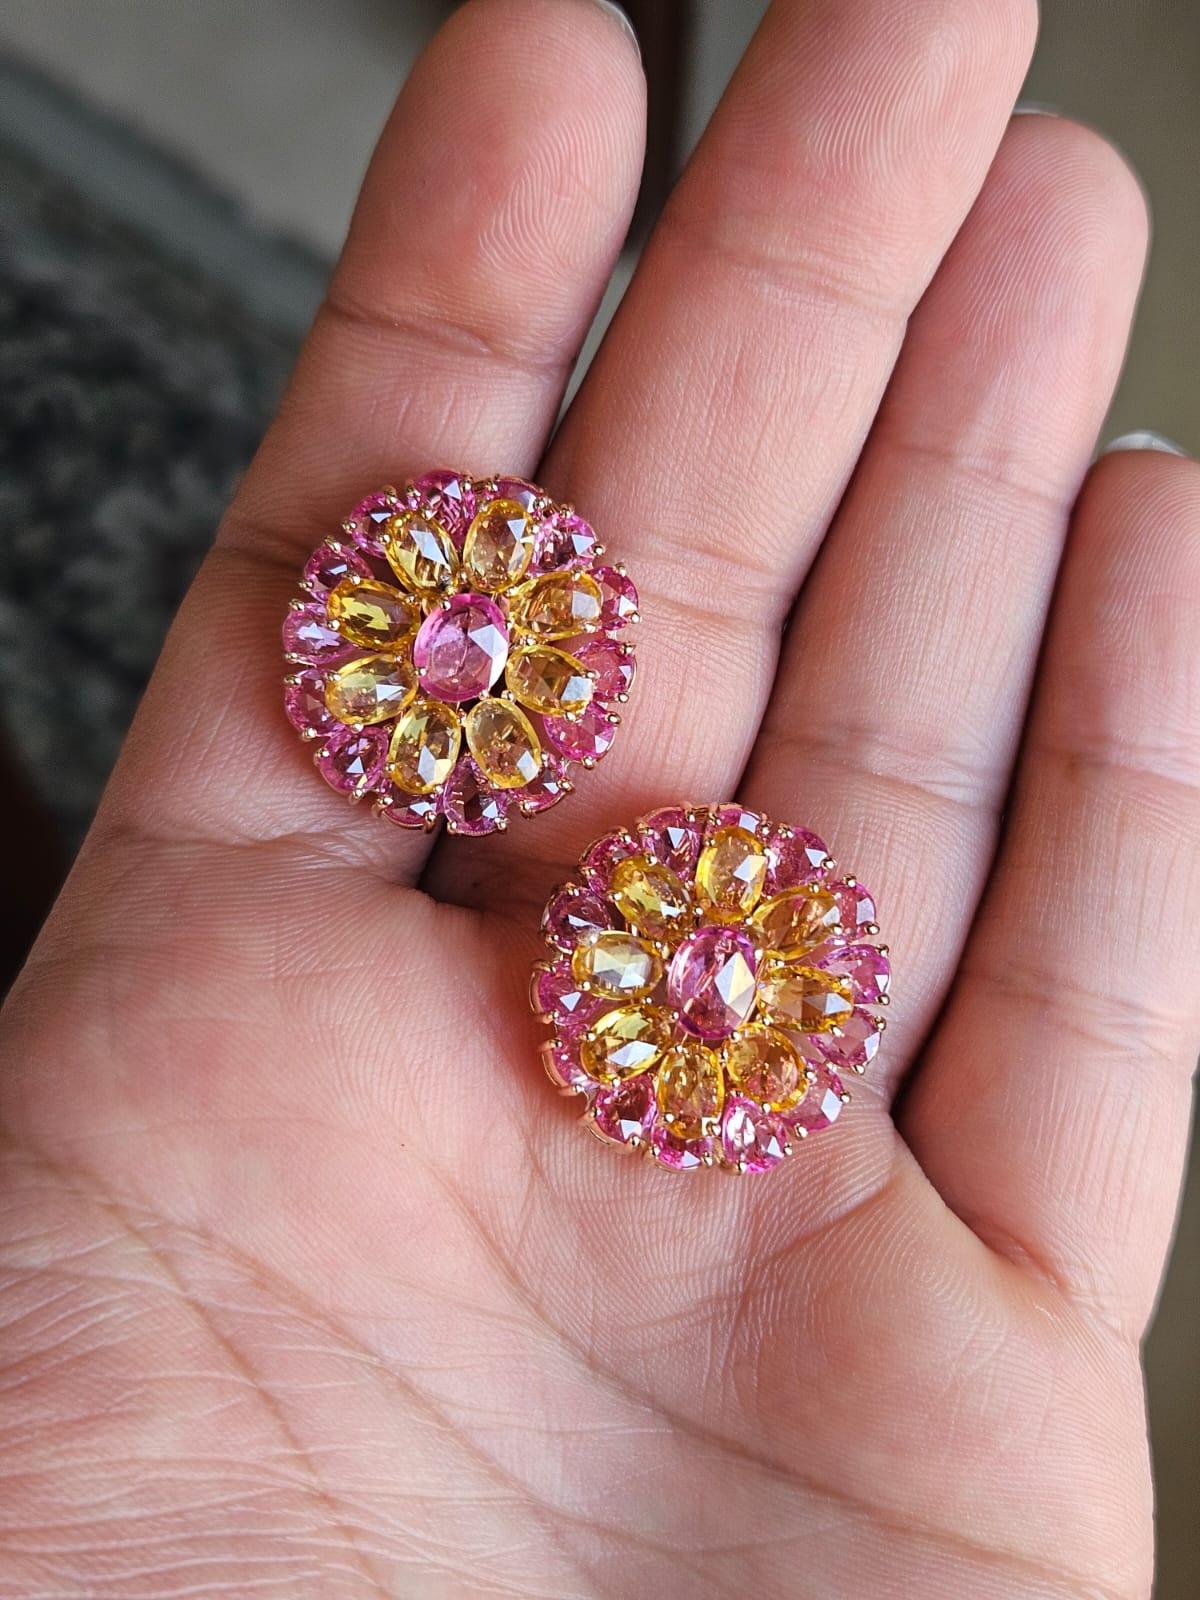 A very special and gorgeous, Yellow Sapphire & Pink Sapphire Earrings set in 18K Rose Gold. The weight of the Yellow Sapphires is 7.28 carats. The Yellow Sapphires are of Ceylon (Sri Lanka) origin. The weight of the Pink Sapphires is 9.65 carats.